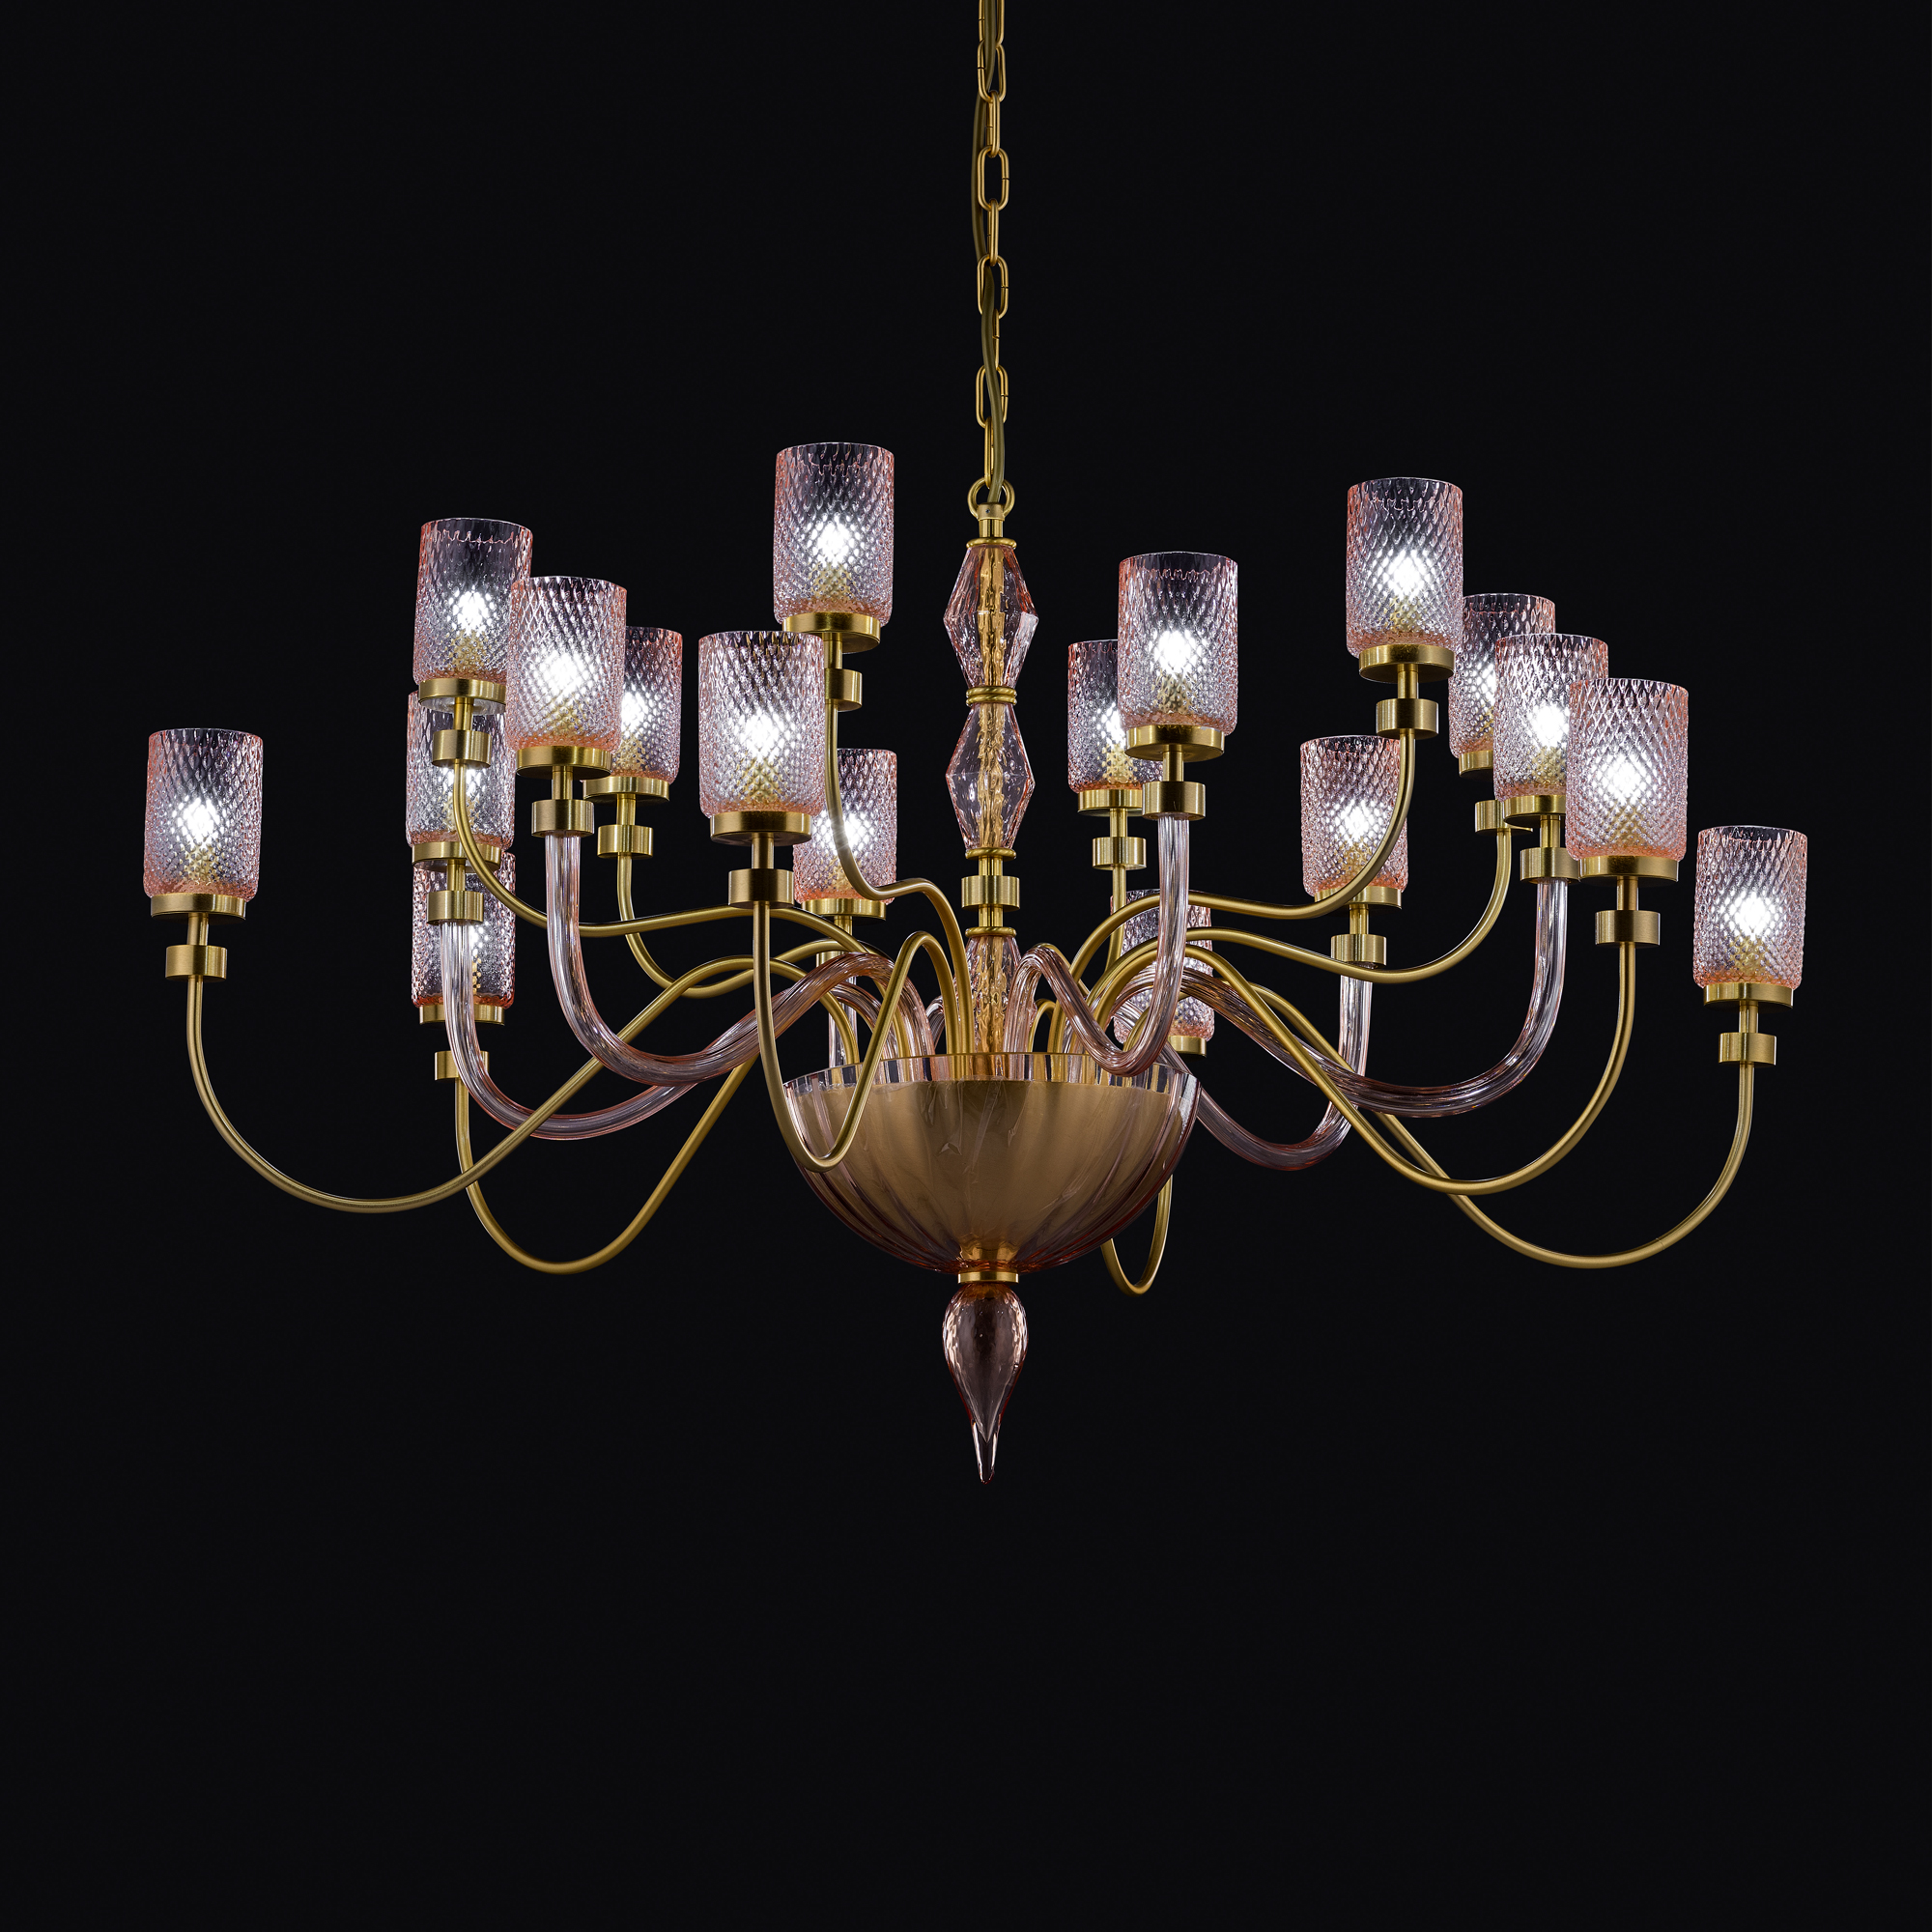 Chandelier With Balloton Effect Glass Shades